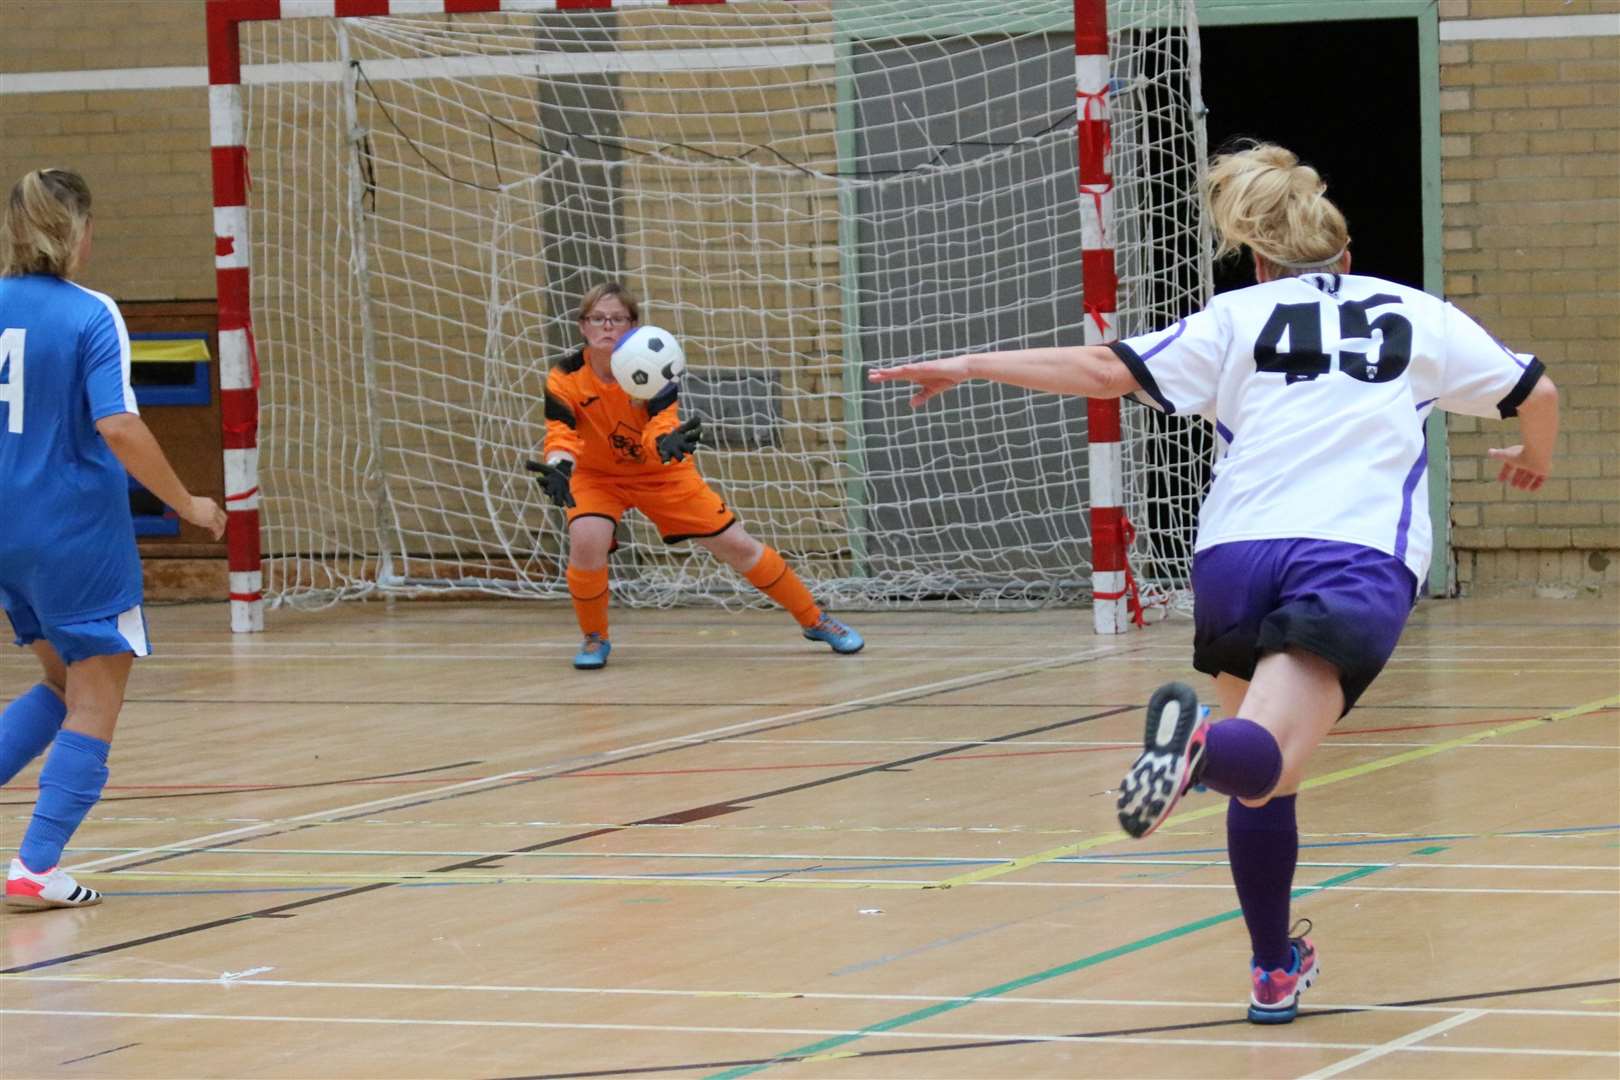 Medway Park hosted the Women’s Futsal Festival on Saturday involving eight teams